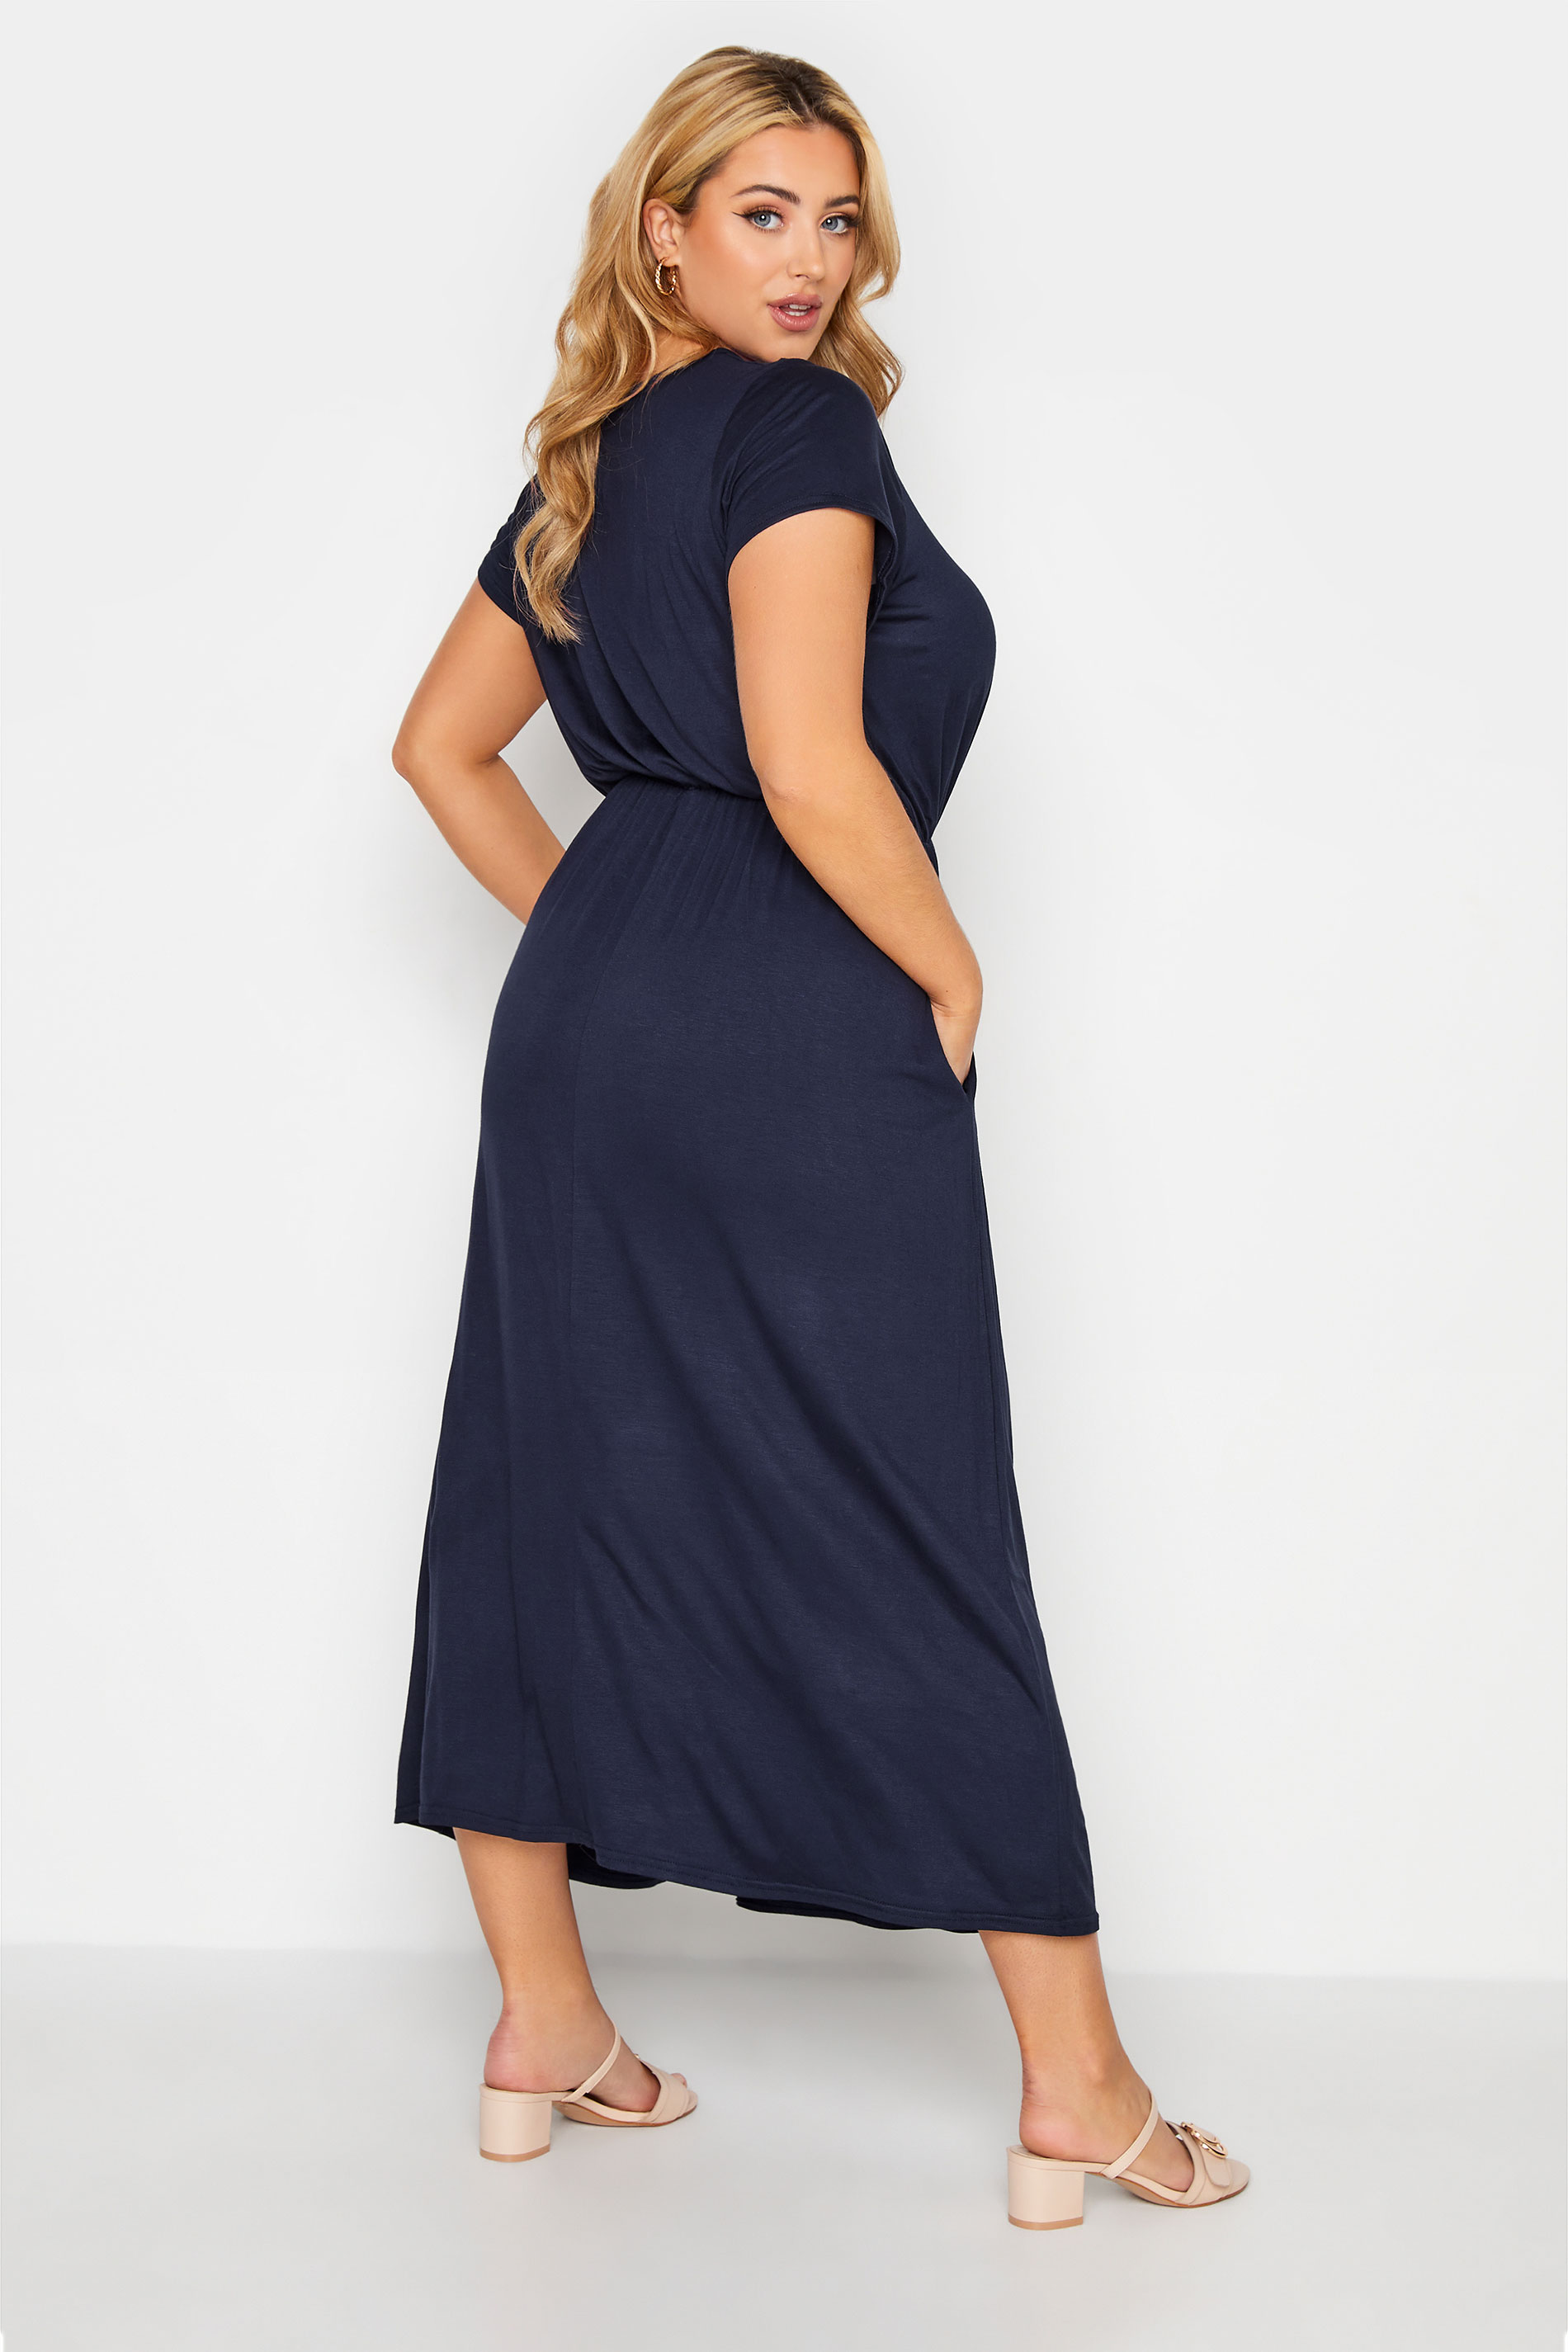 YOURS LONDON Navy Blue Pocket Maxi Dress | Yours Clothing 3